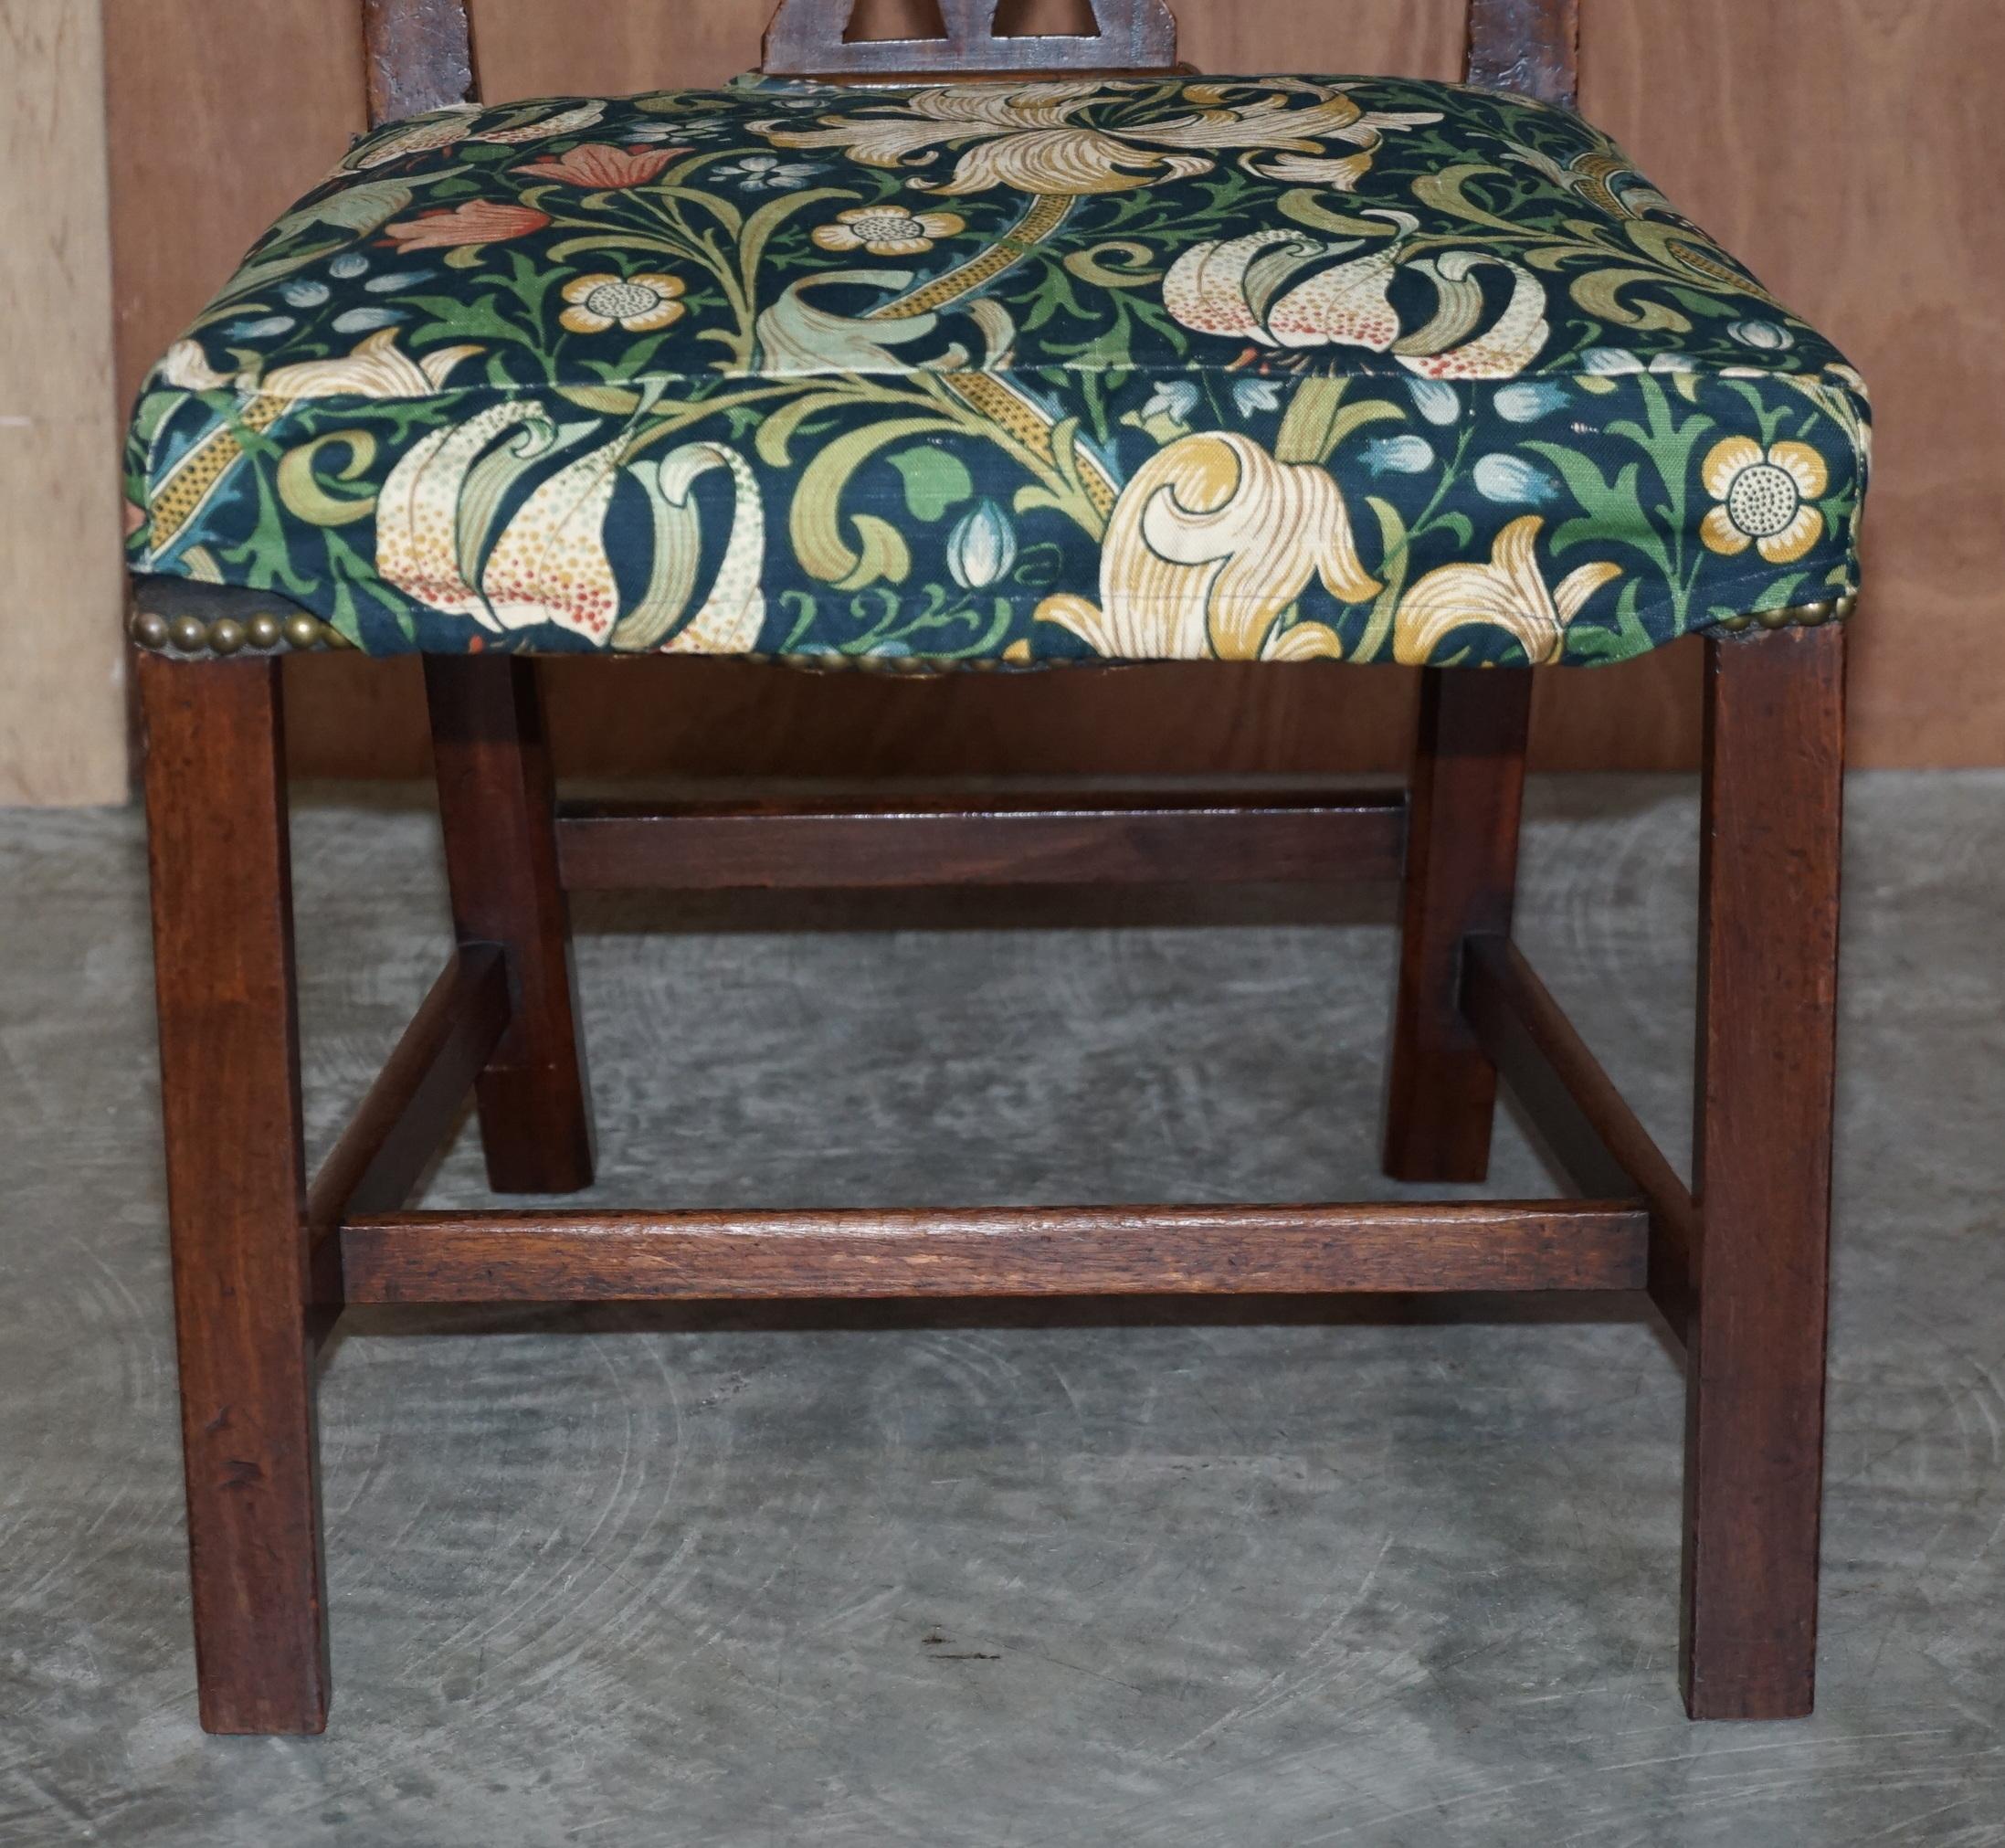 Upholstery 8 Antique George III circa 1830 Thomas Chippendale Dining Chairs William Morris For Sale